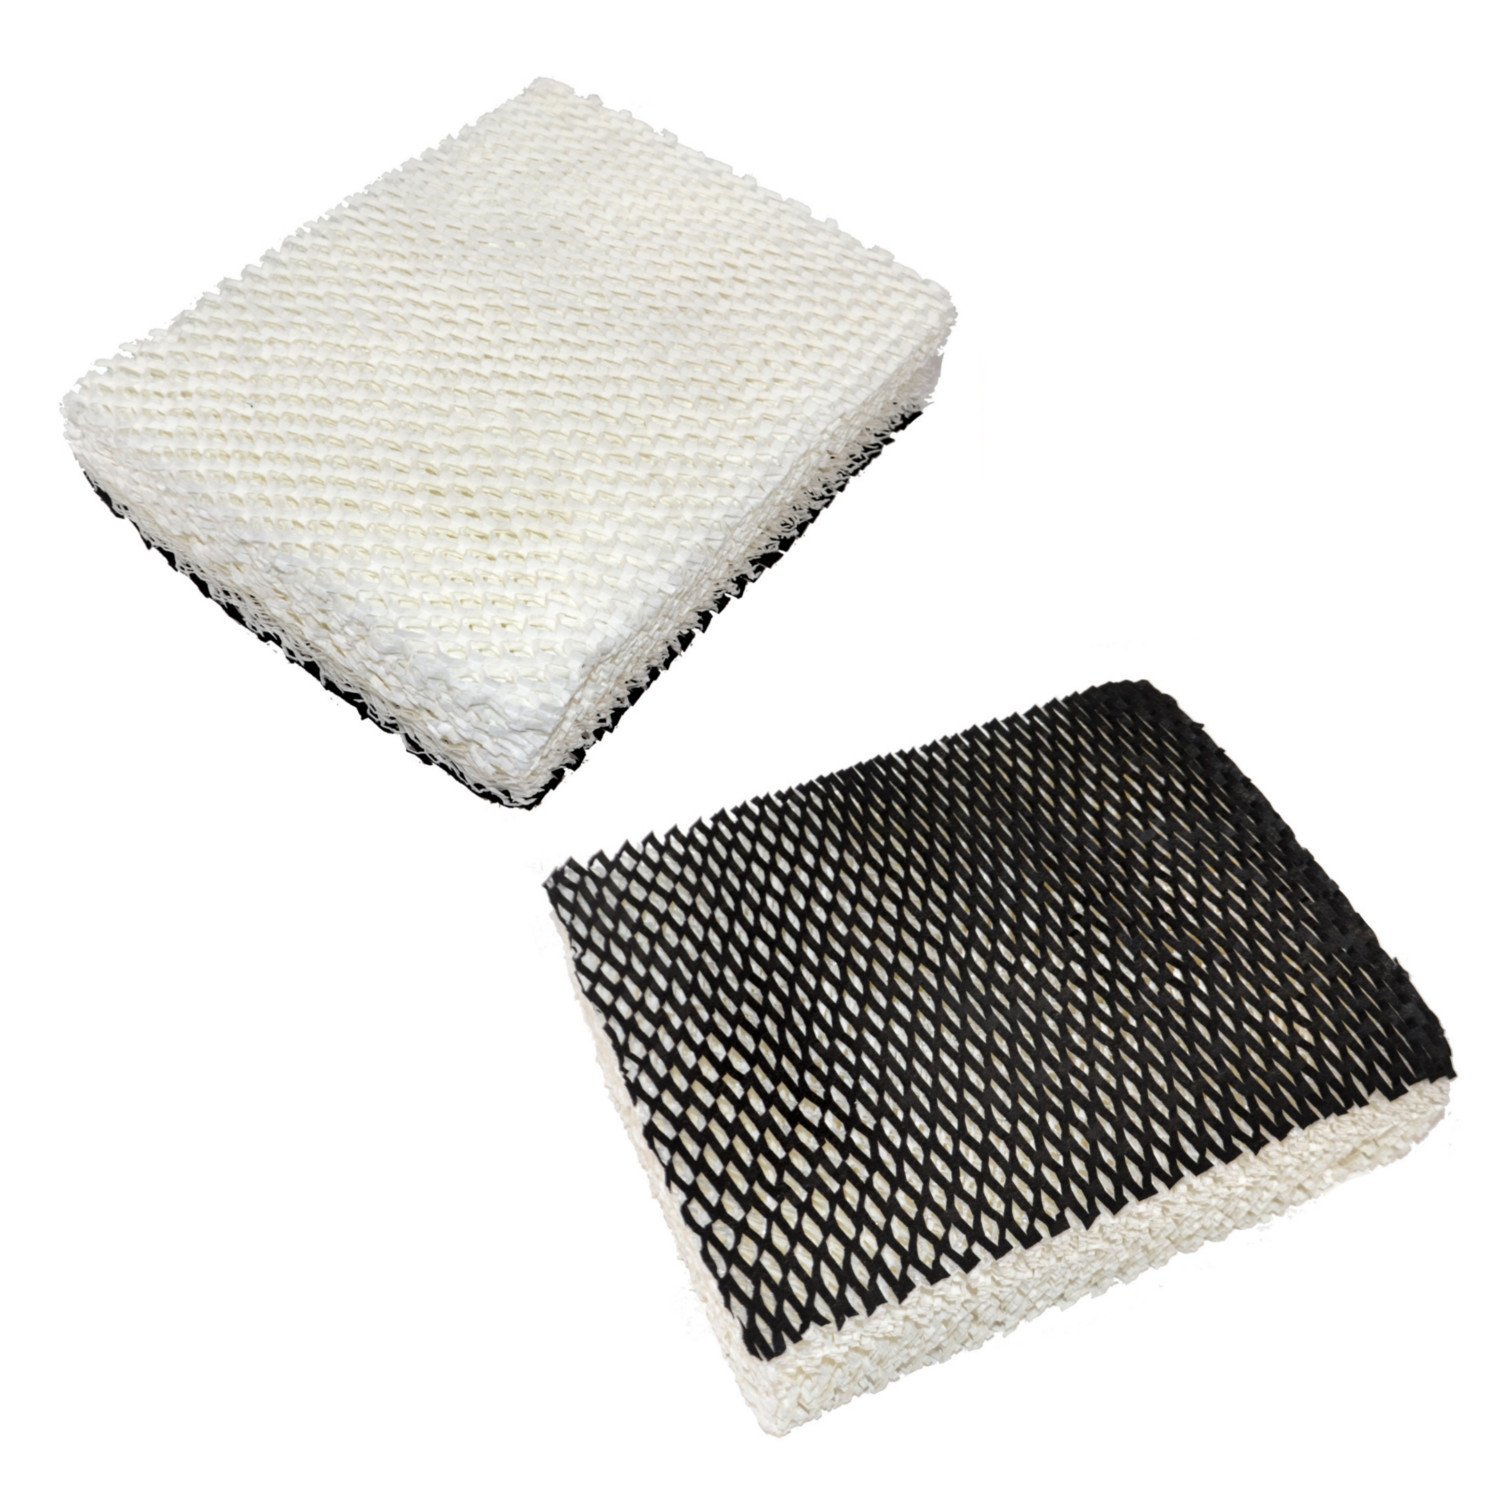 HQRP 2-pack Humidifier Wick Filter for Bionaire C22, C33, W2, W2S, W6, W6H, W6S, W7, W9, W9H, W9S Humidifiers, part 900 900CS